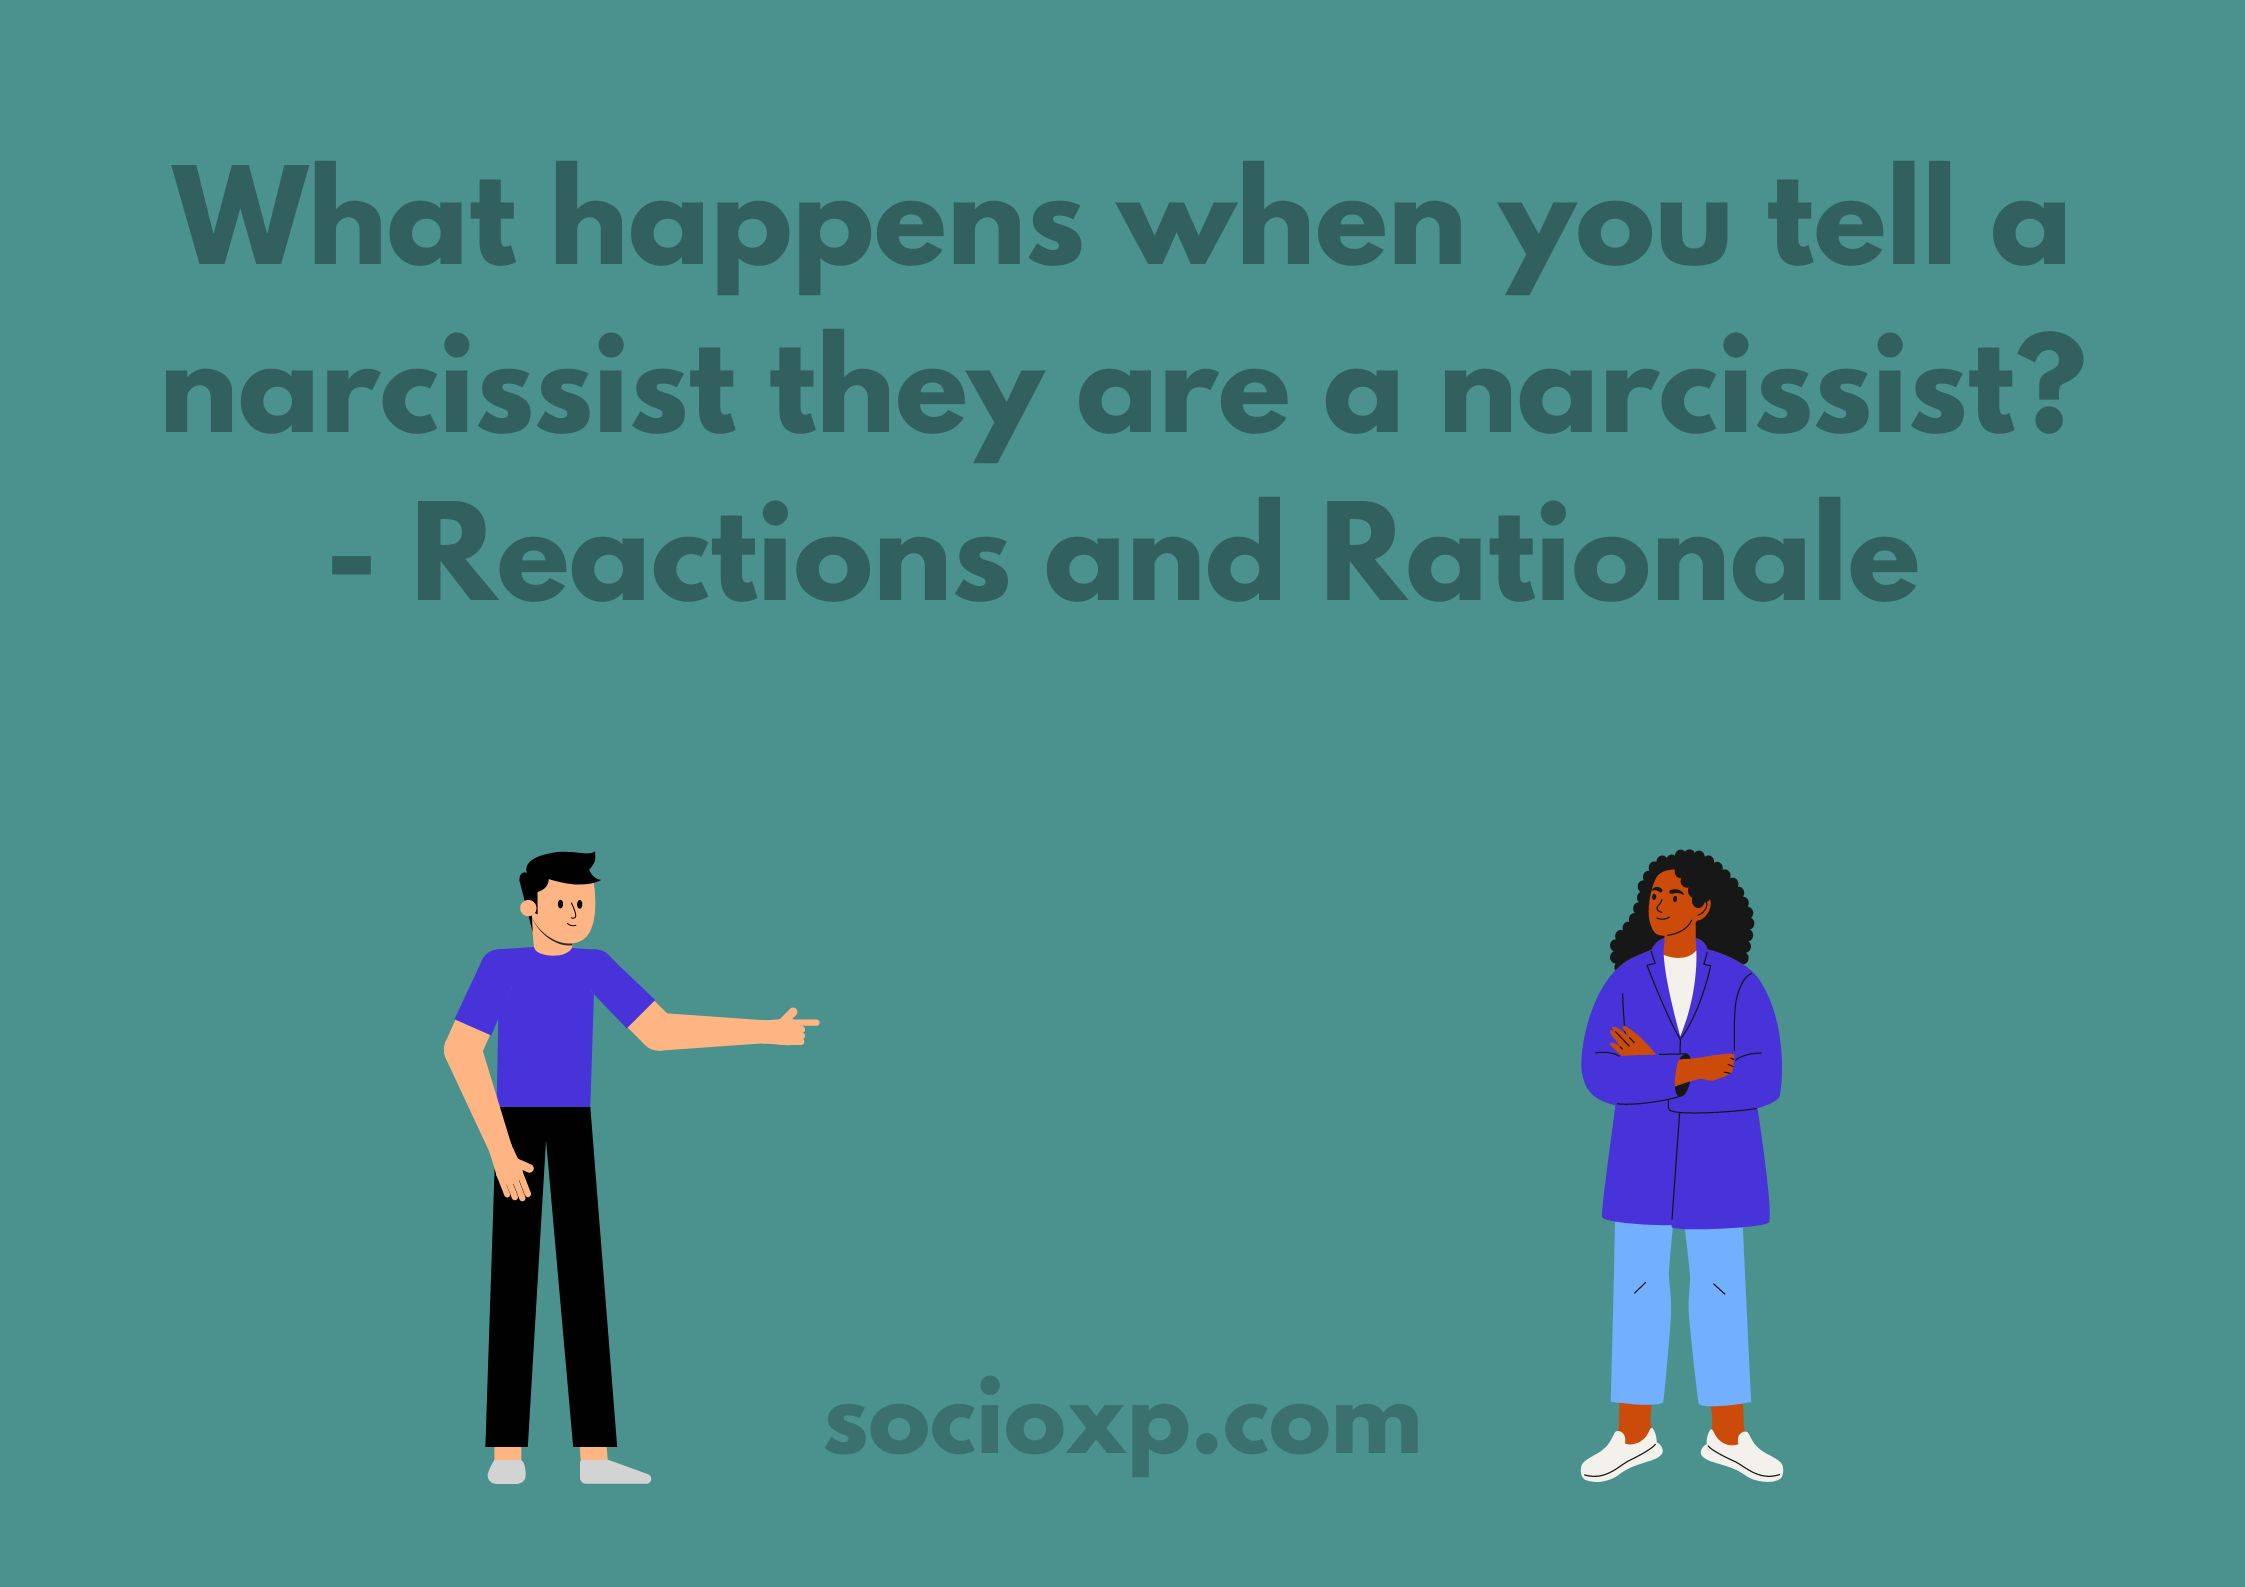 What happens when you tell a narcissist they are a narcissist? - Reactions and Rationale